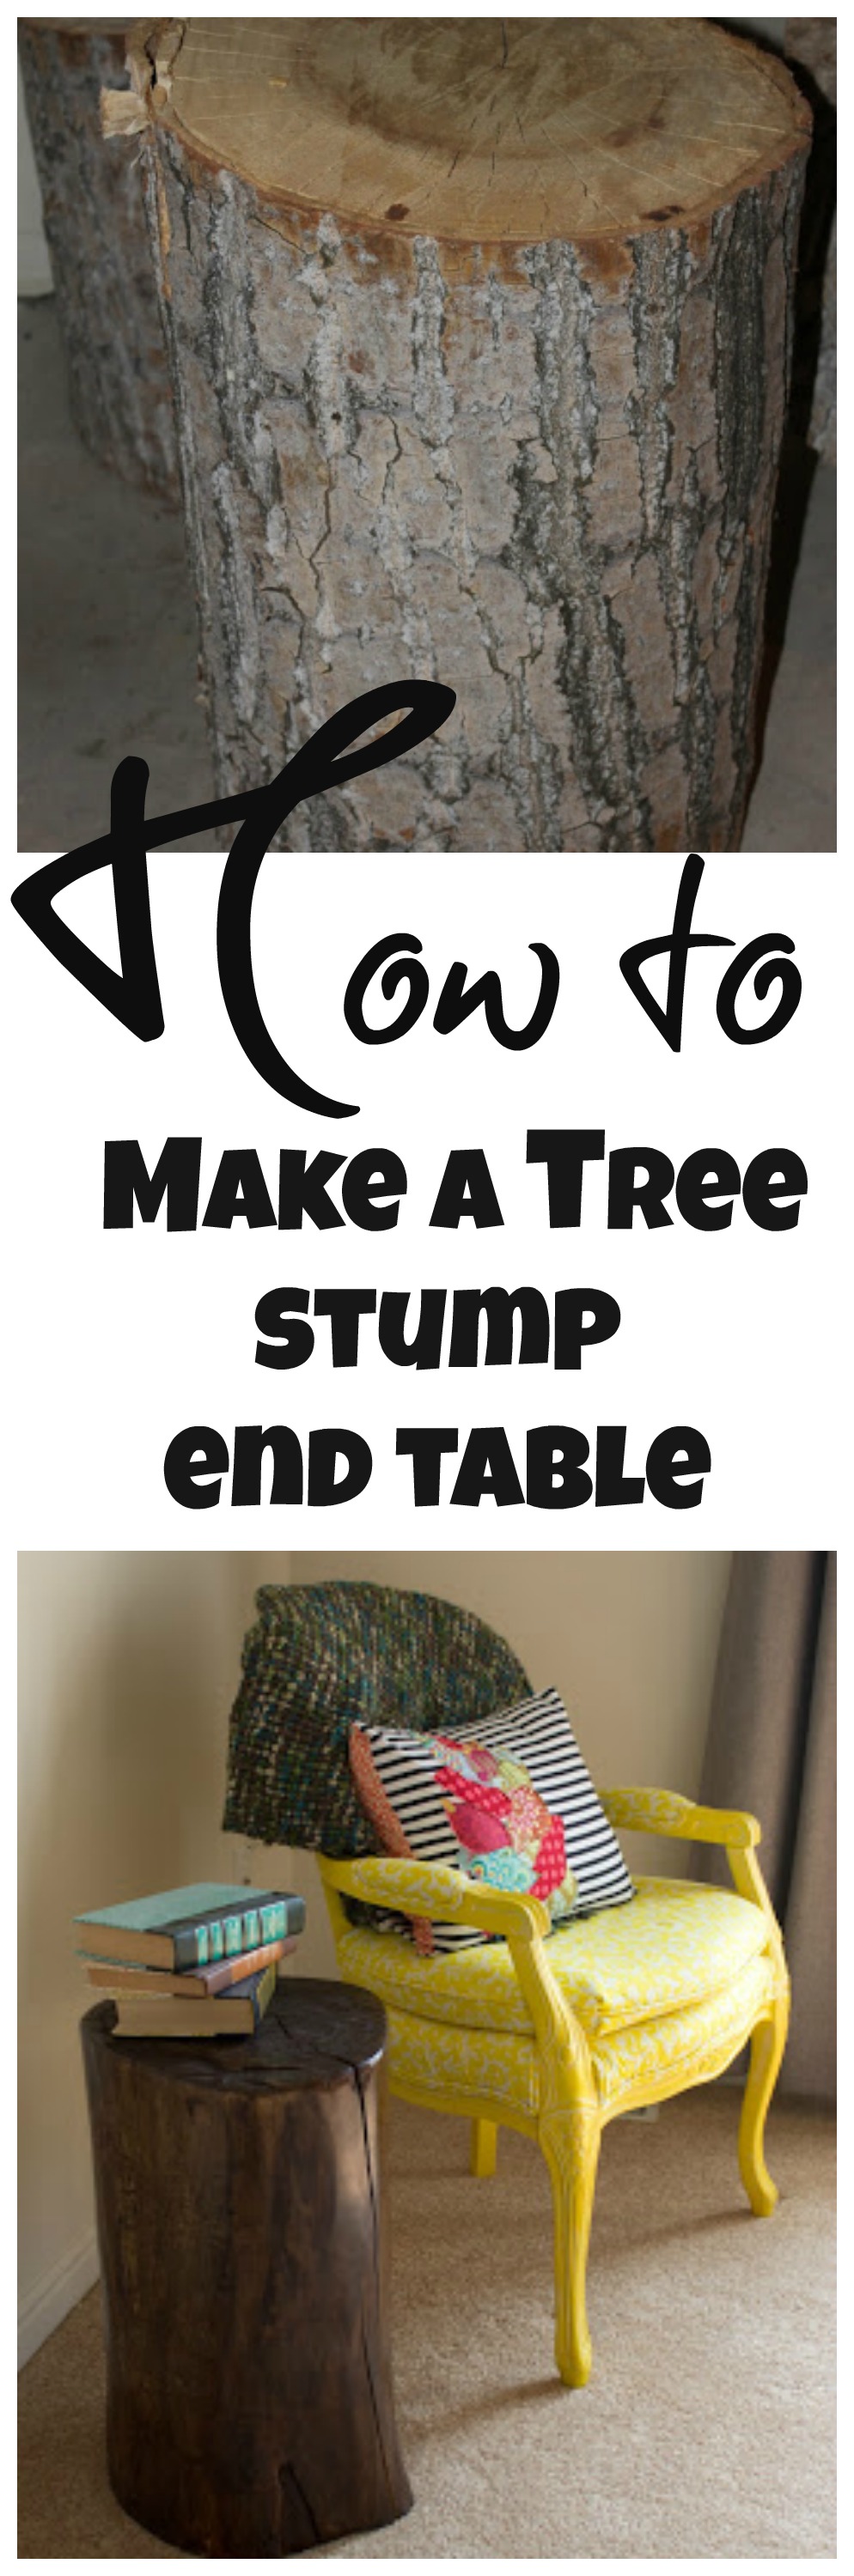 How to make an end table out of a tree stump